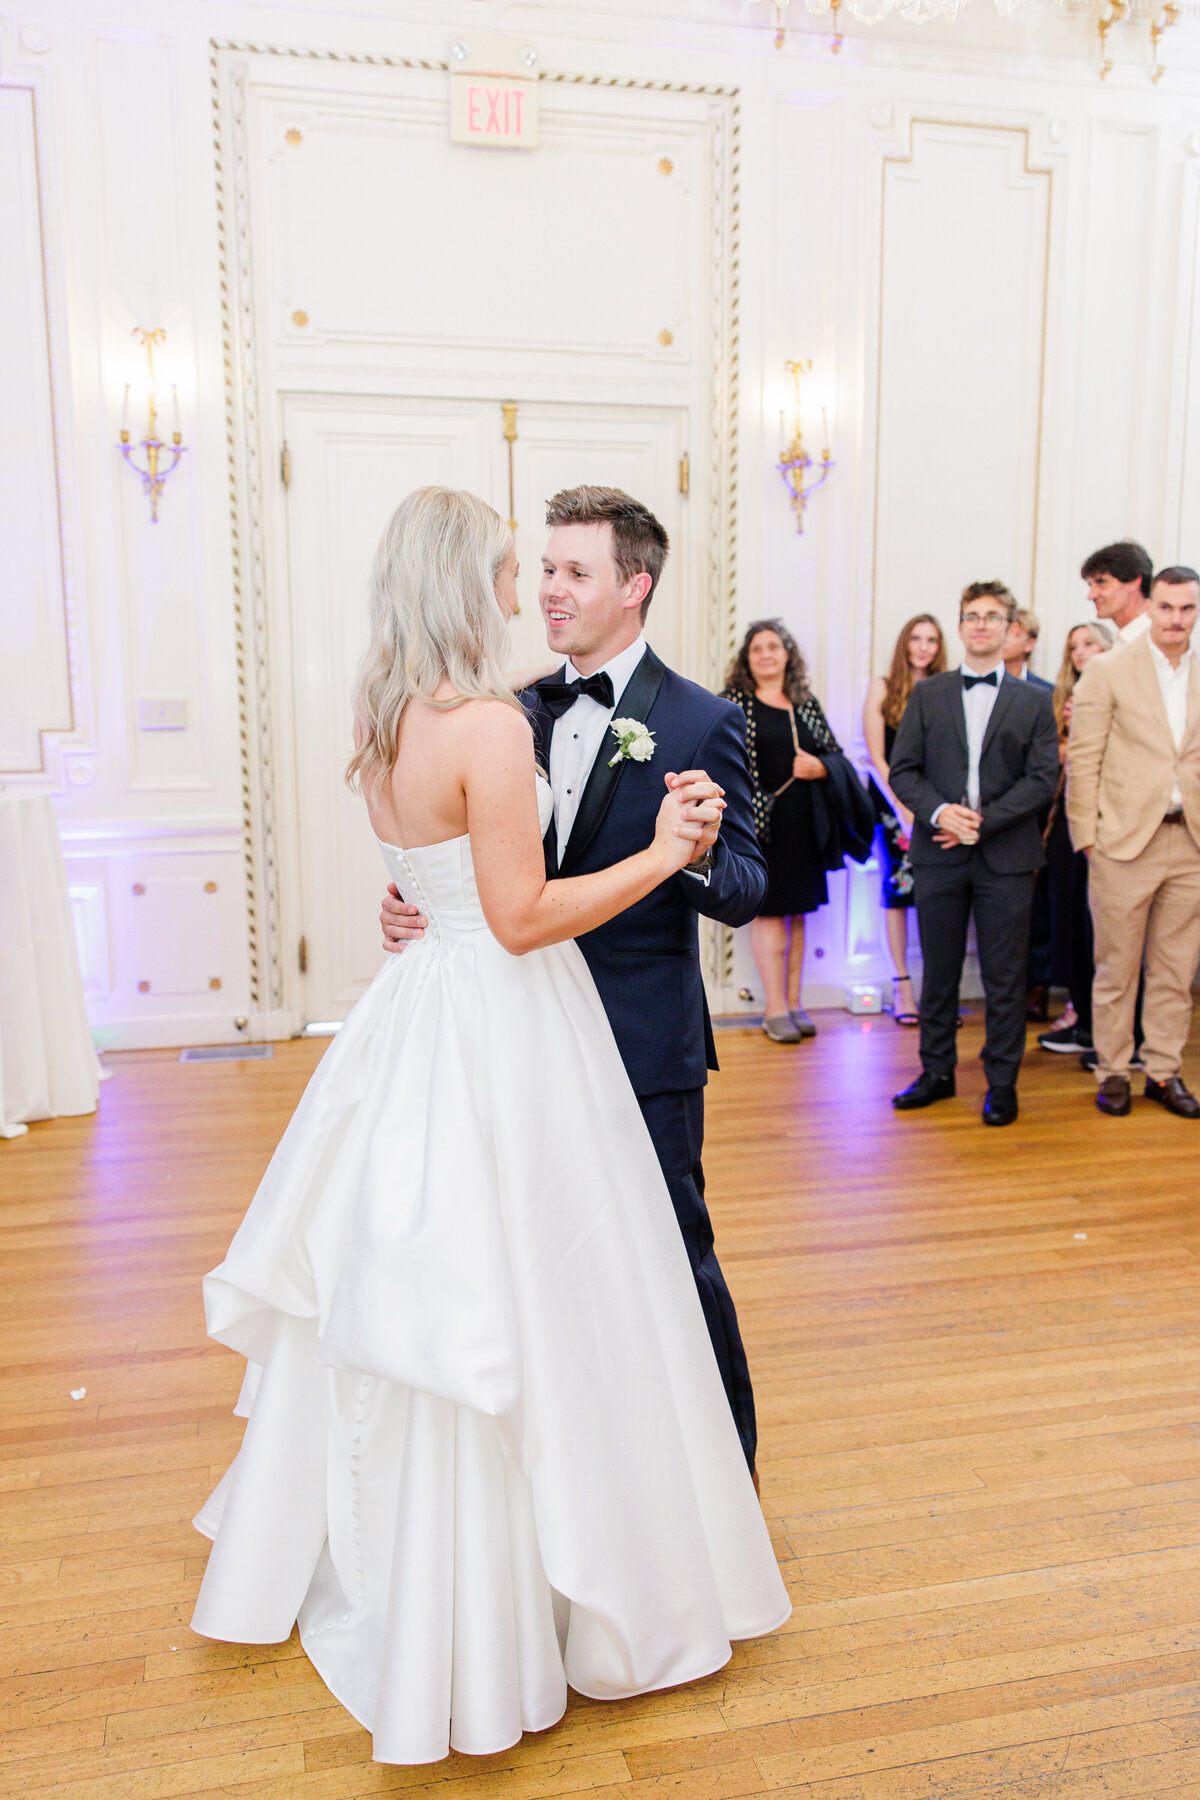 Bride and groom sharing their first dance representing candid Boston wedding photography